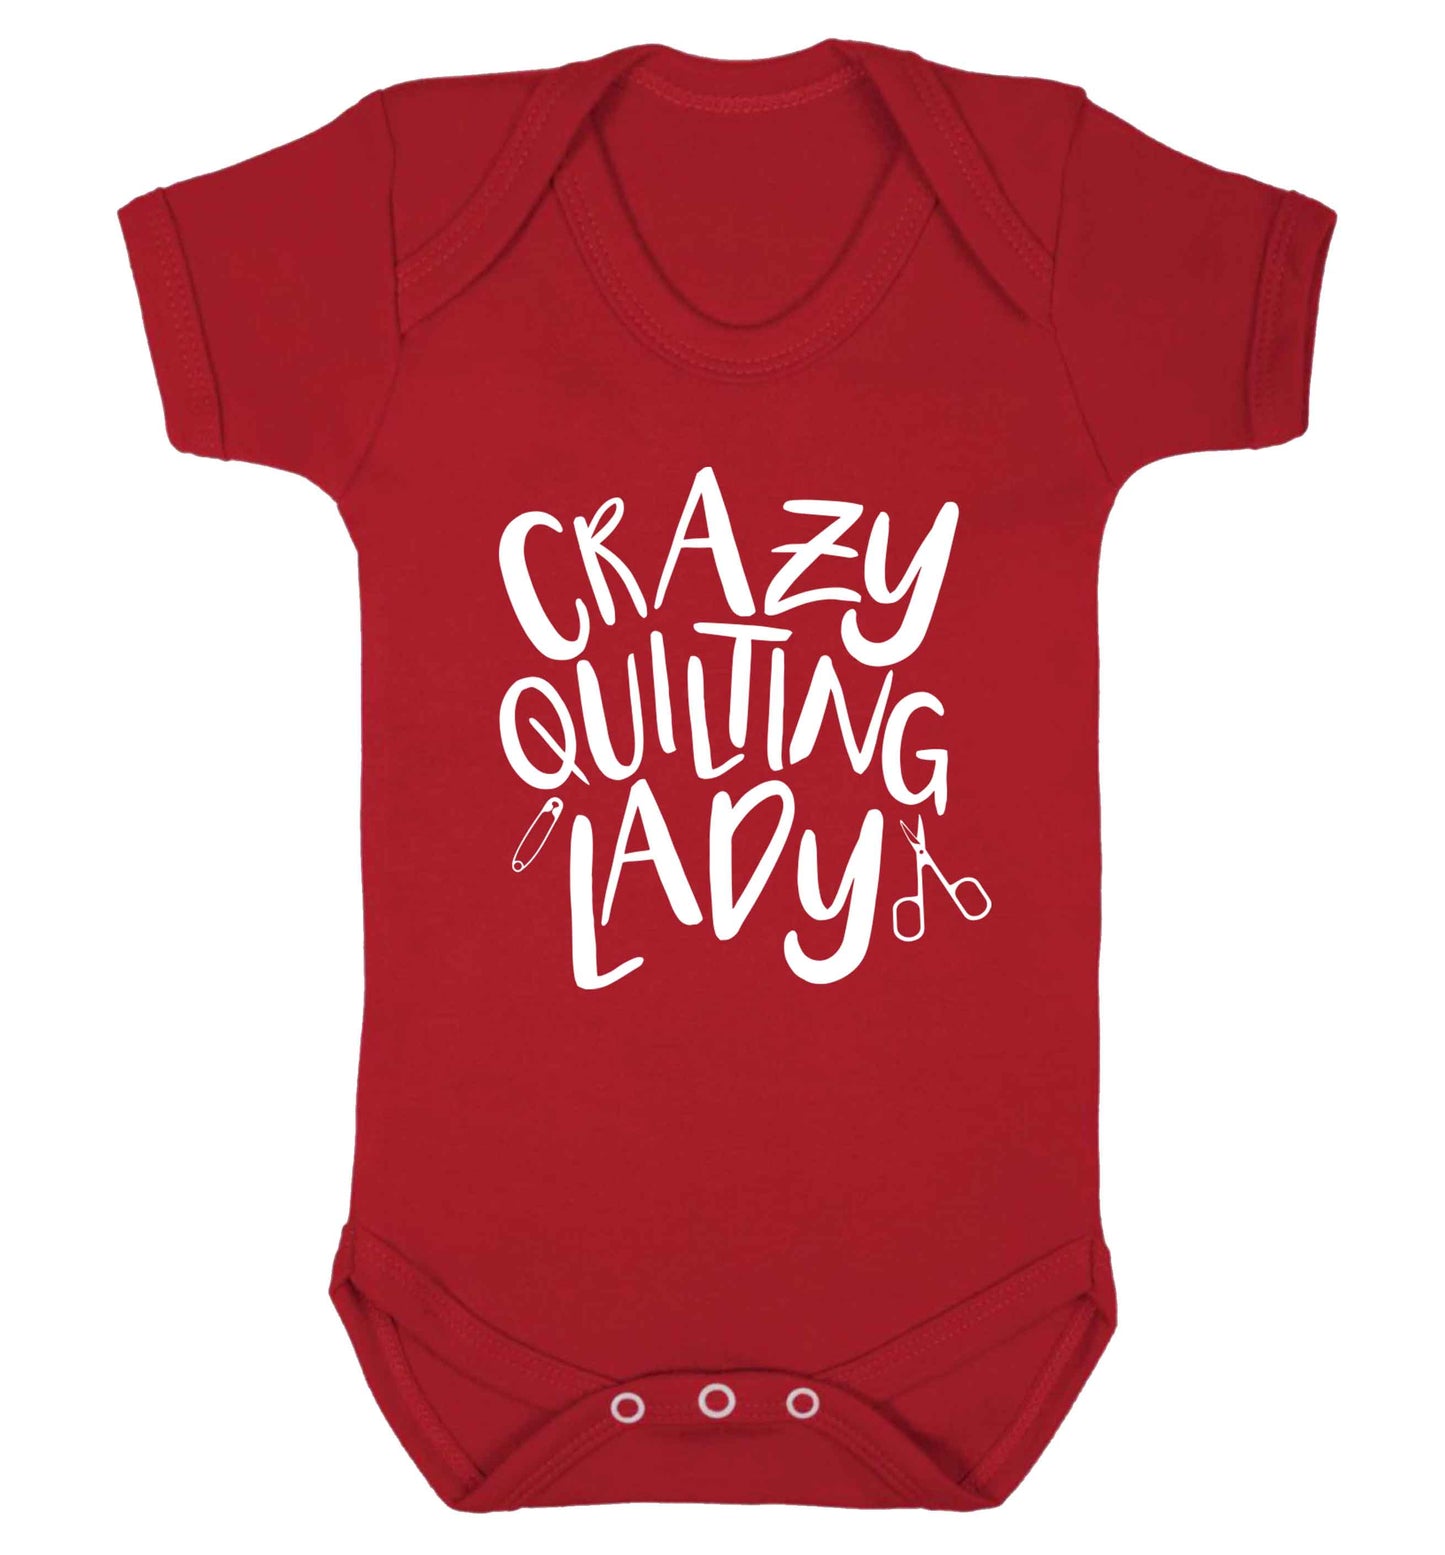 Crazy quilting lady Baby Vest red 18-24 months